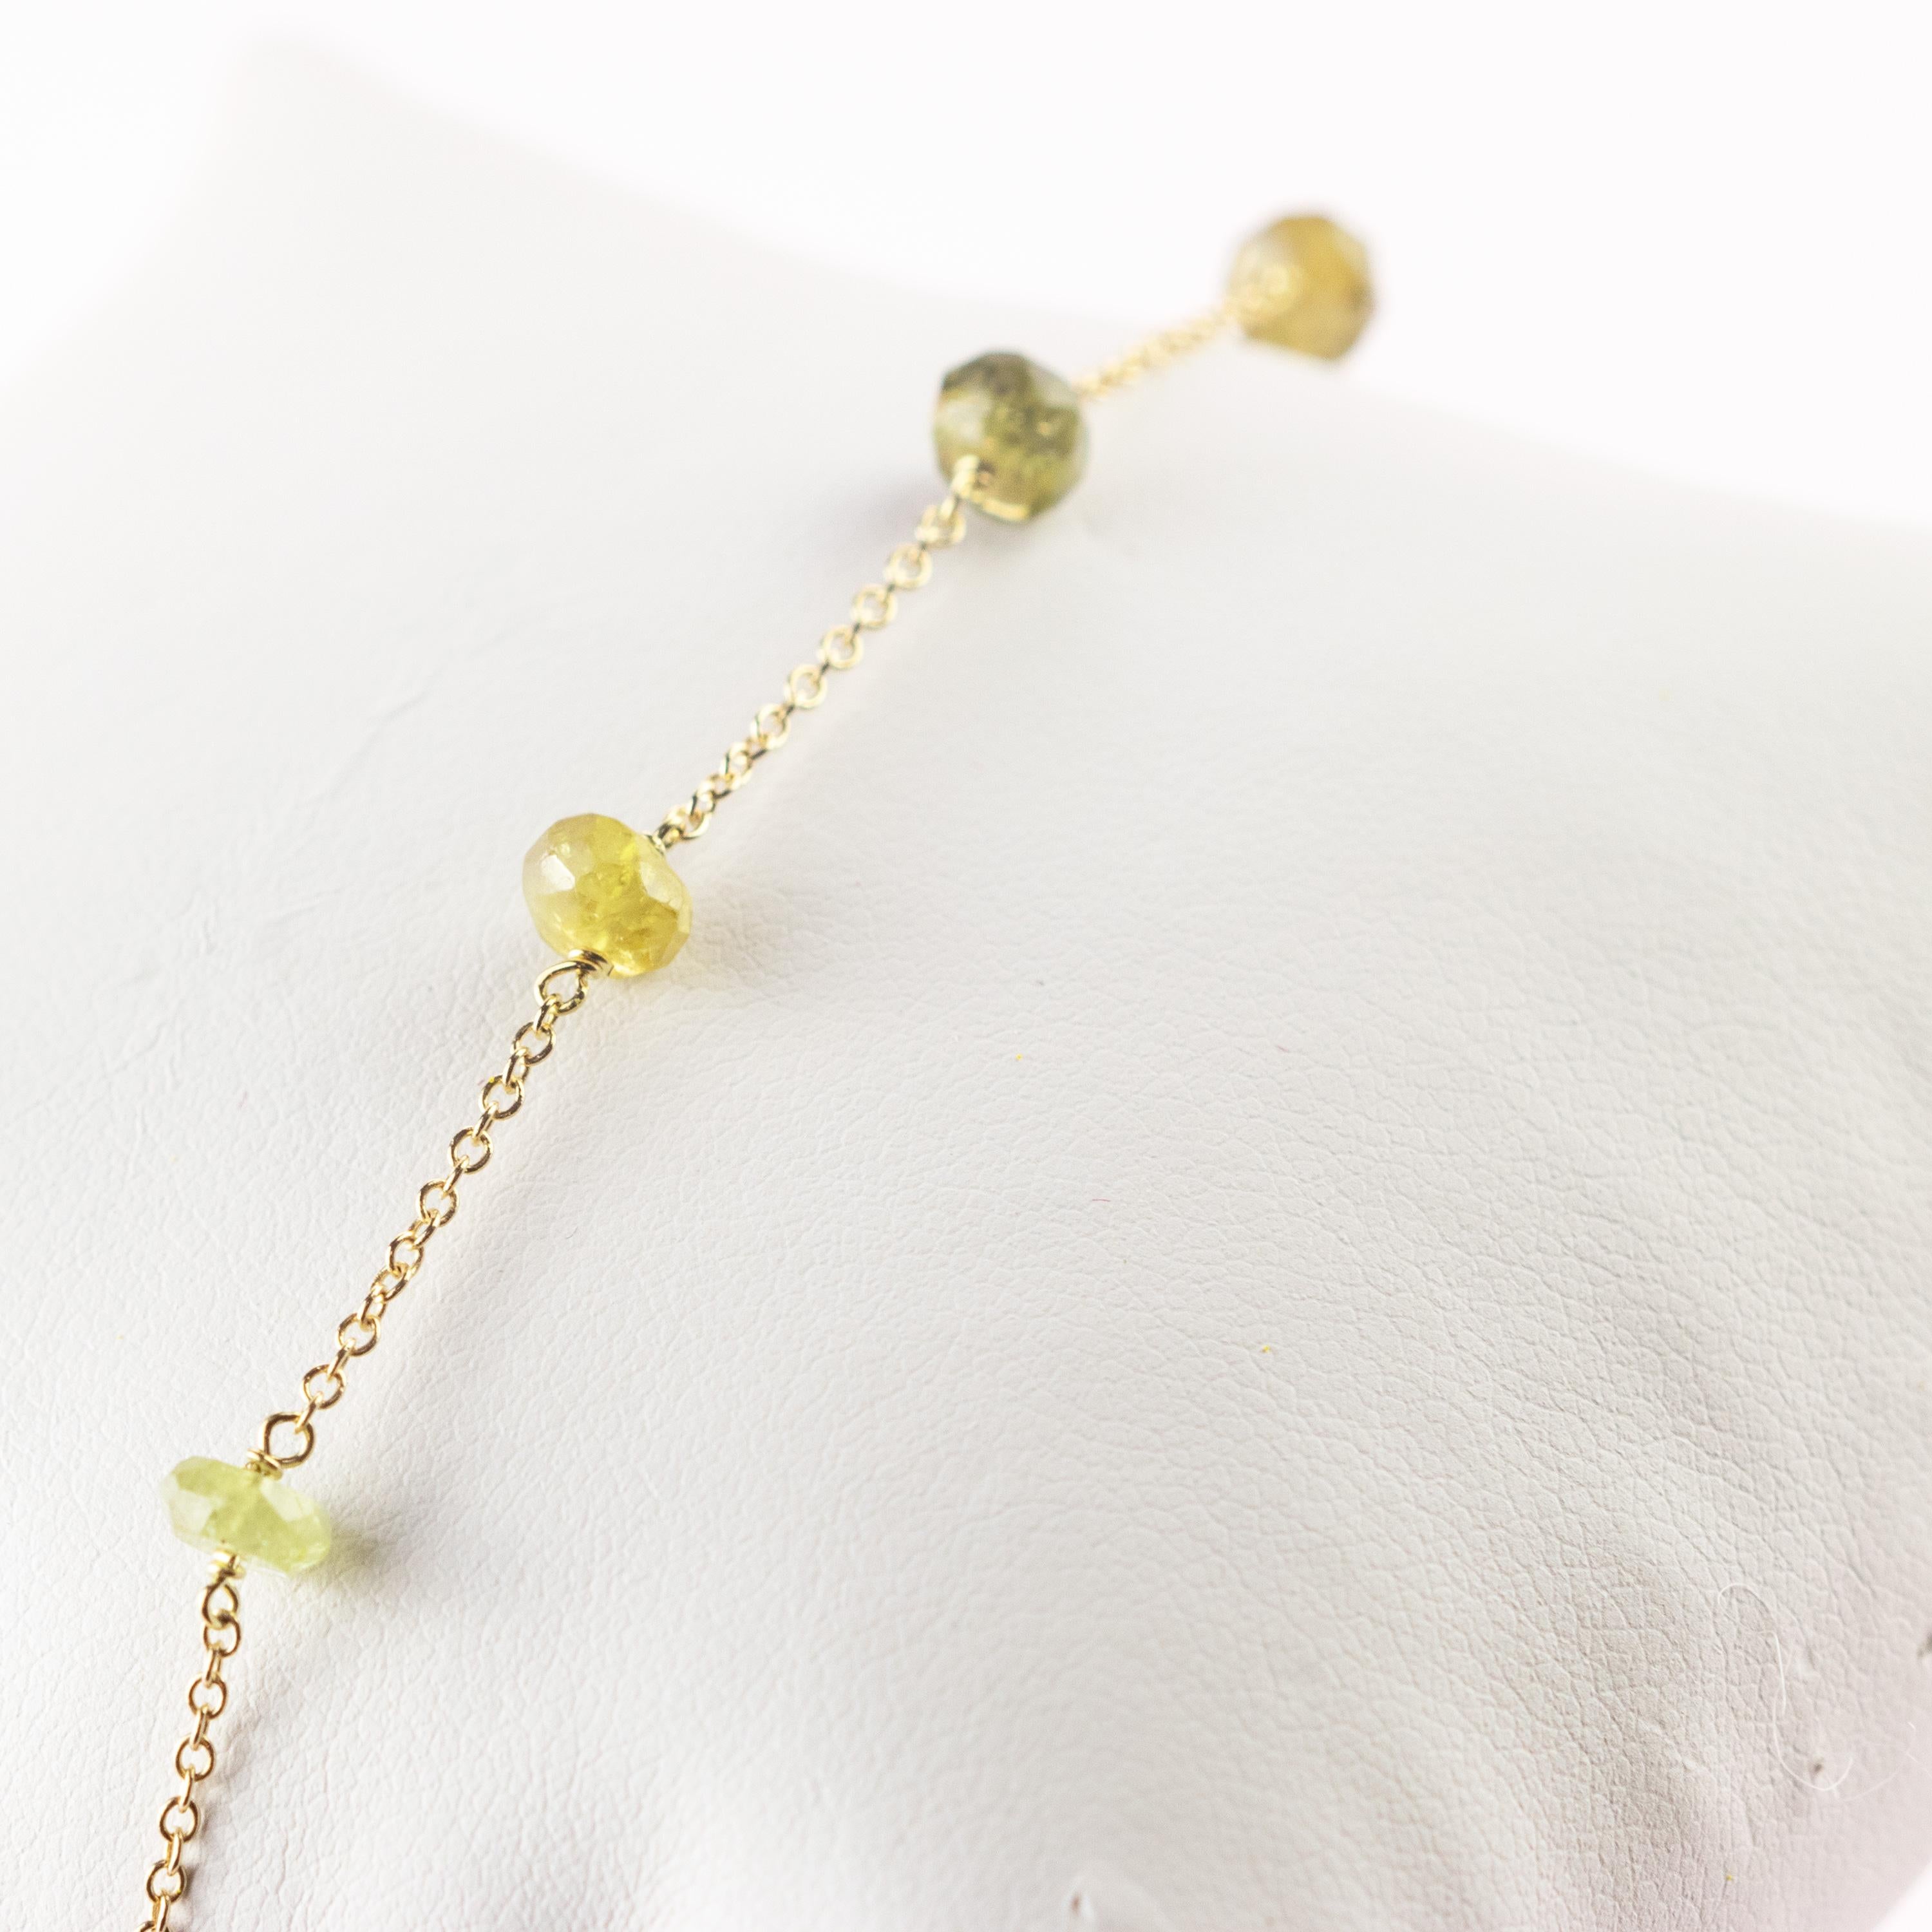 Marvellous bracelet starring natural green tourmaline rondelles gems, for a bright charm of uniqueness. Luminous jewel with natural precious jewellery on elegant 18 karat yellow gold setting.

Green represents abundance, renewal, growth and nature.